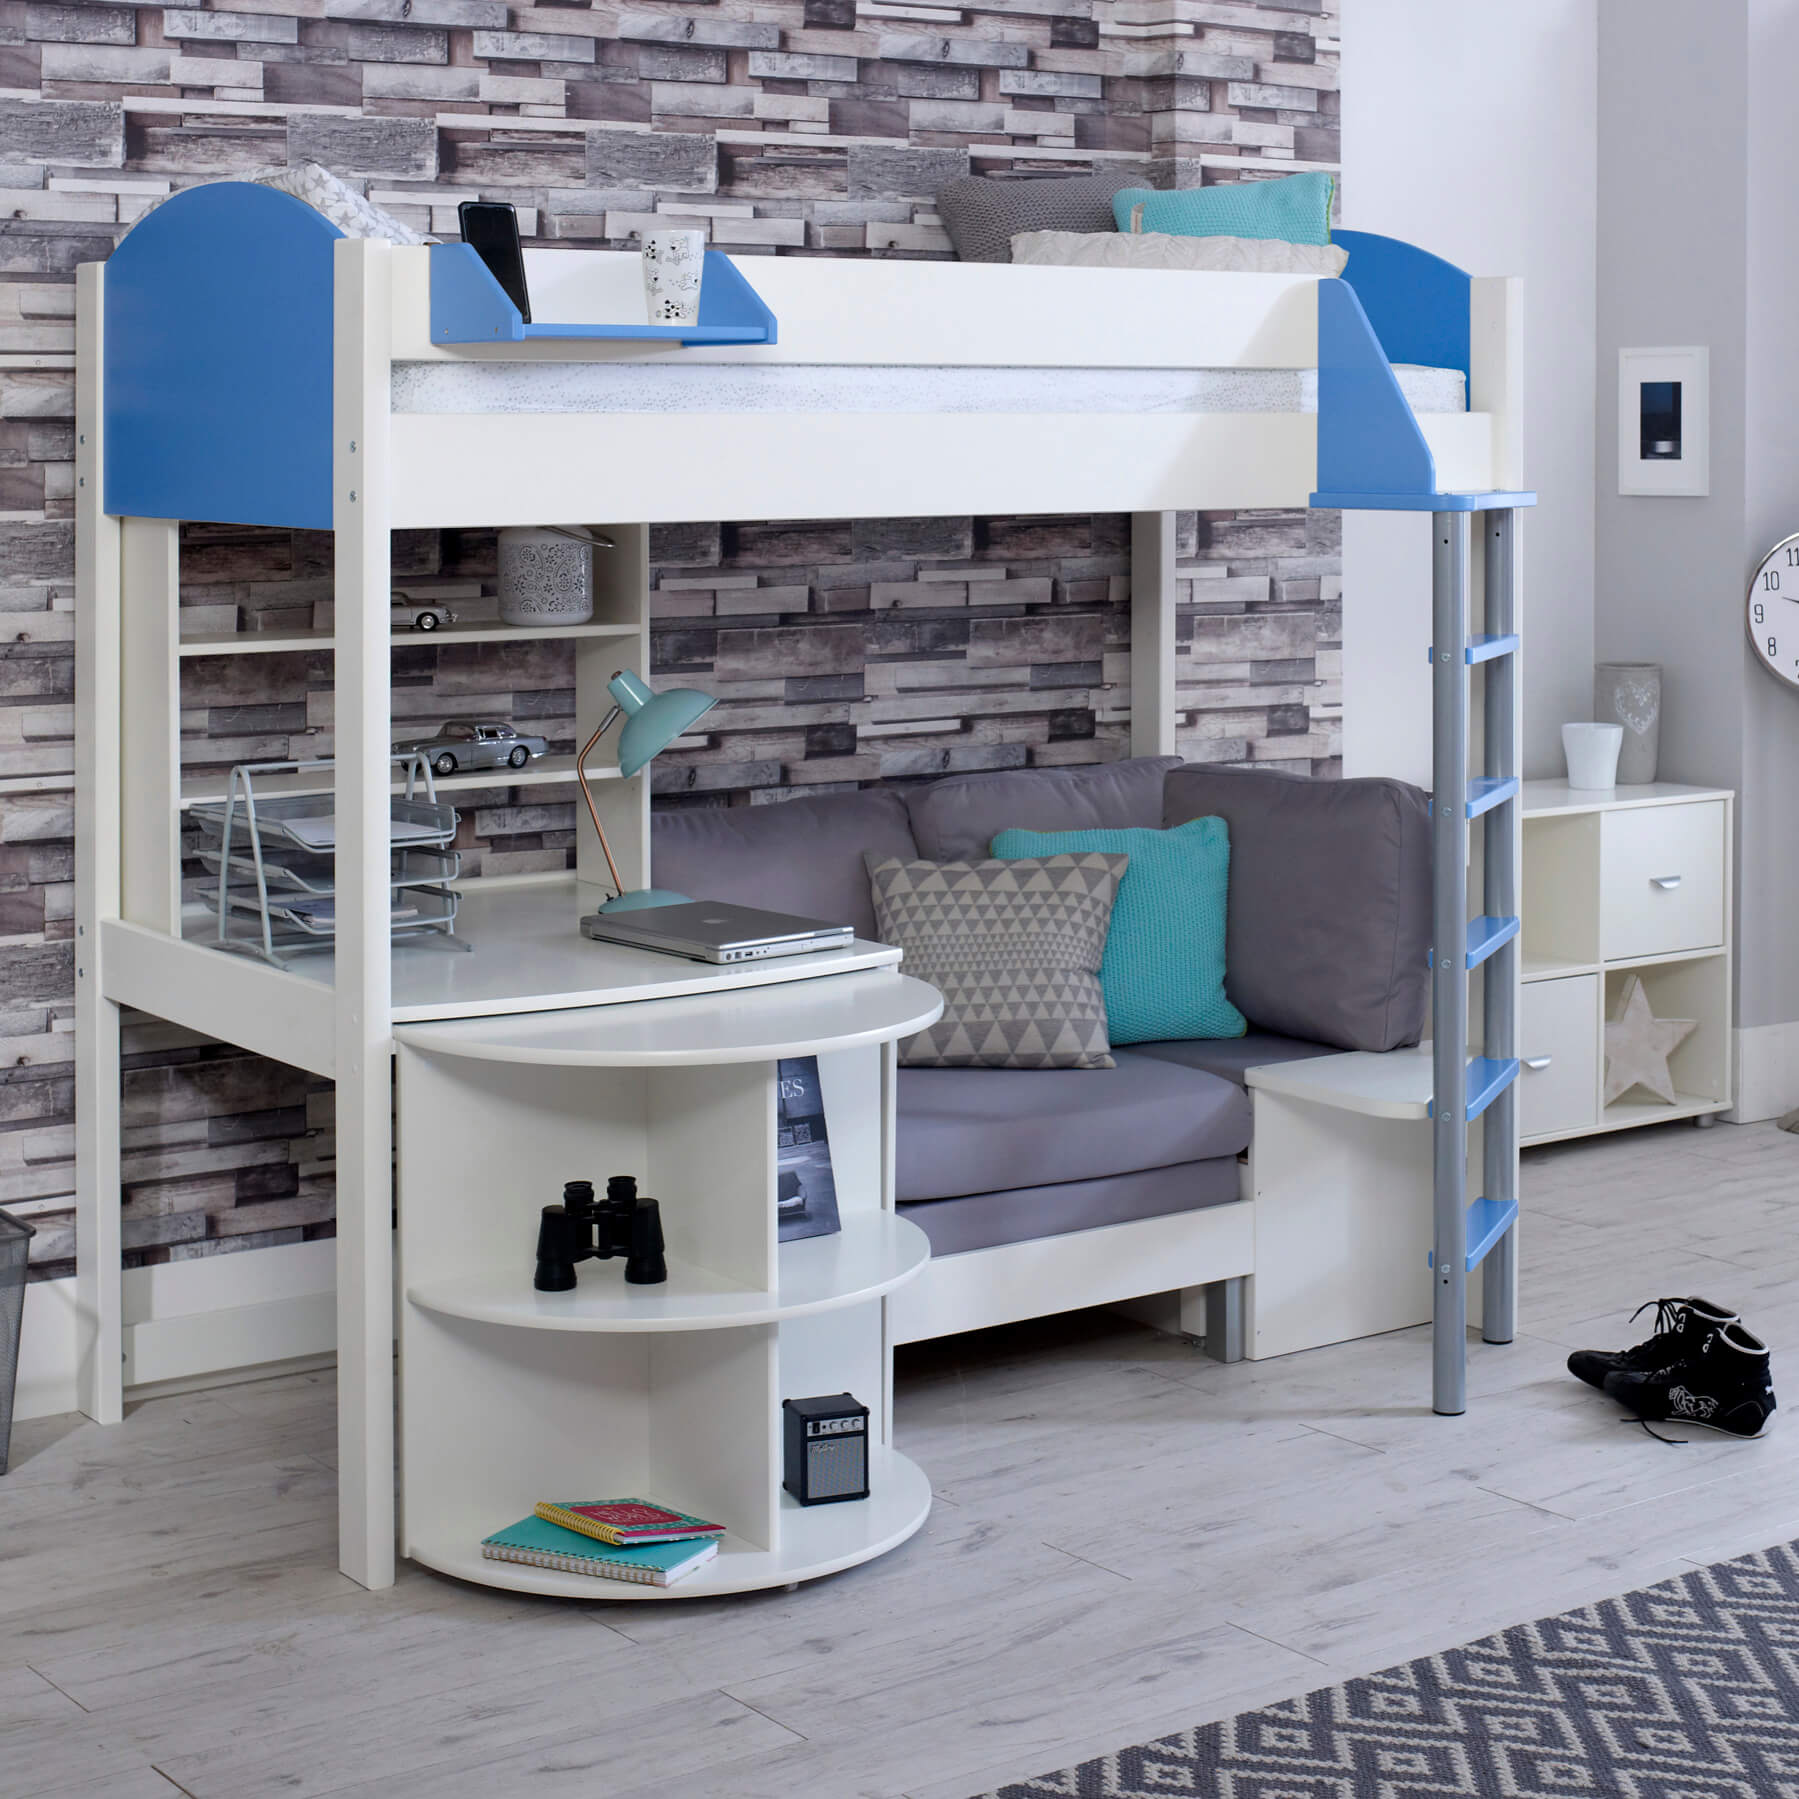 Noah & Eli Caleb High Sleeper Bed in Blue with Desk & Silver Chair Bed & Shelves